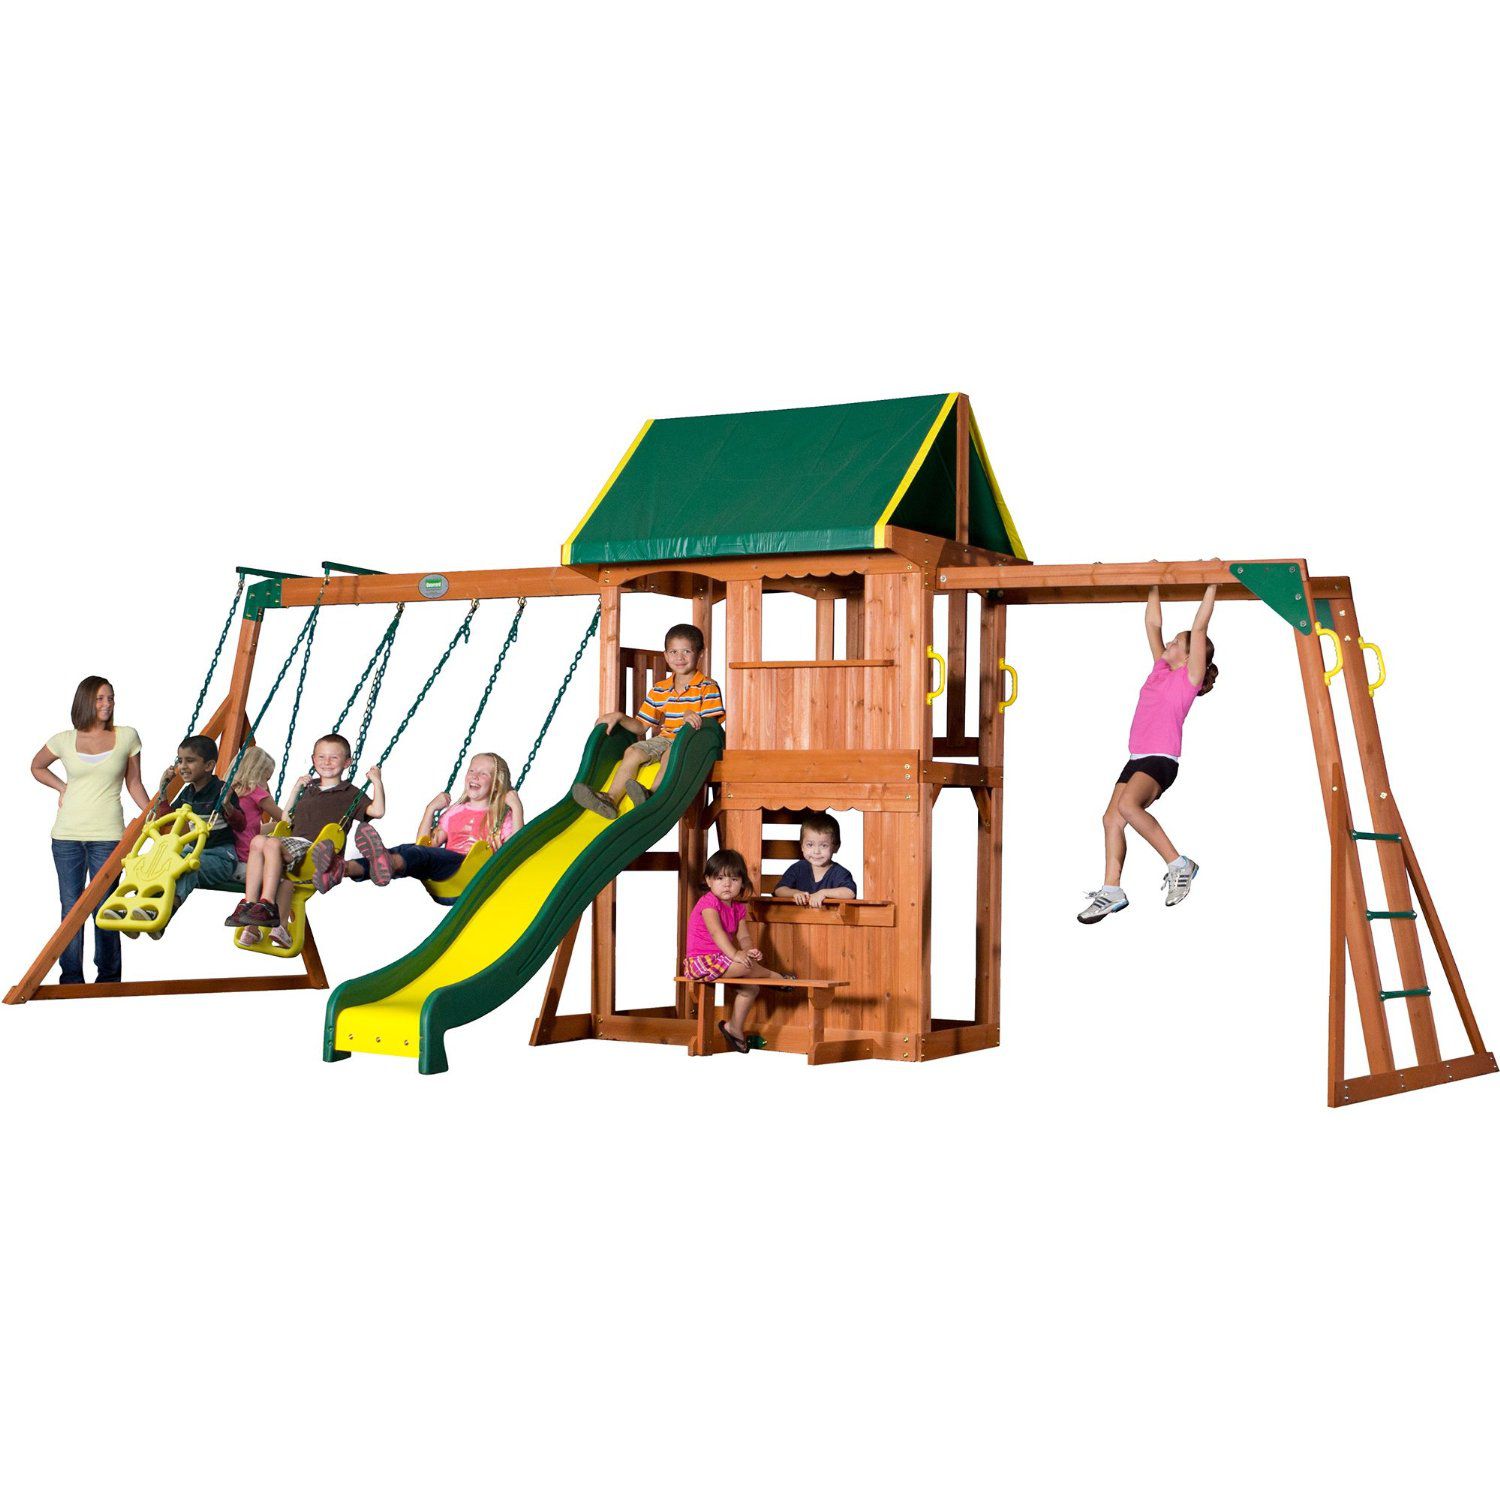 The 10 Best Wooden Swing Sets And Playsets Of 2017